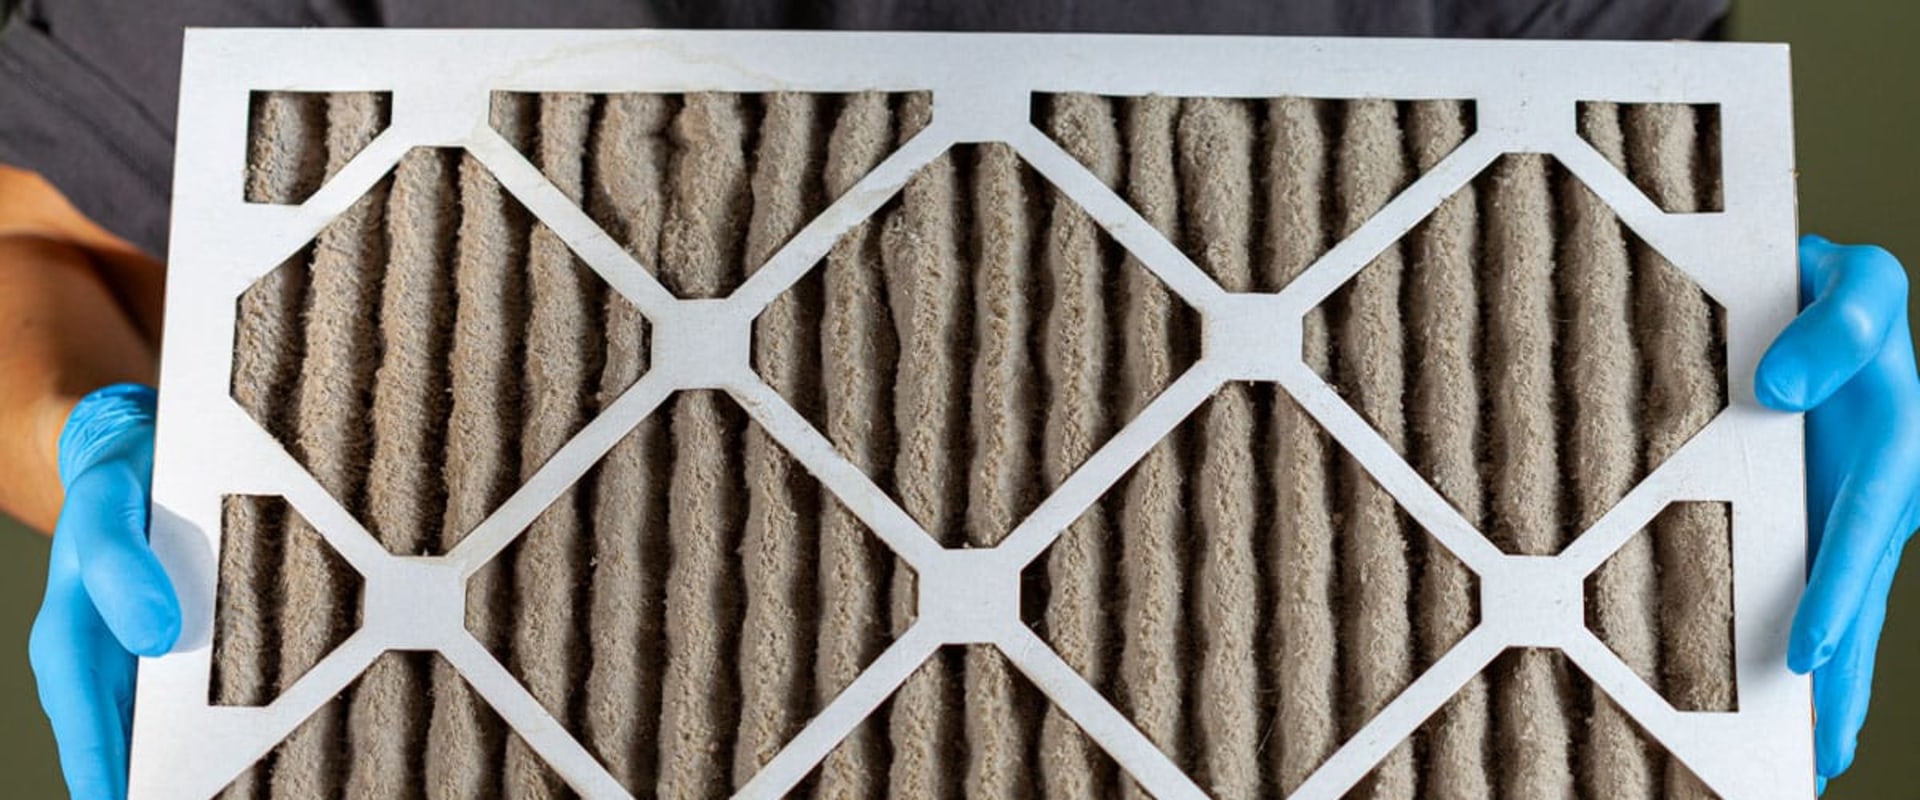 What is the Difference Between Merv 8 and Merv 11 Air Filters?